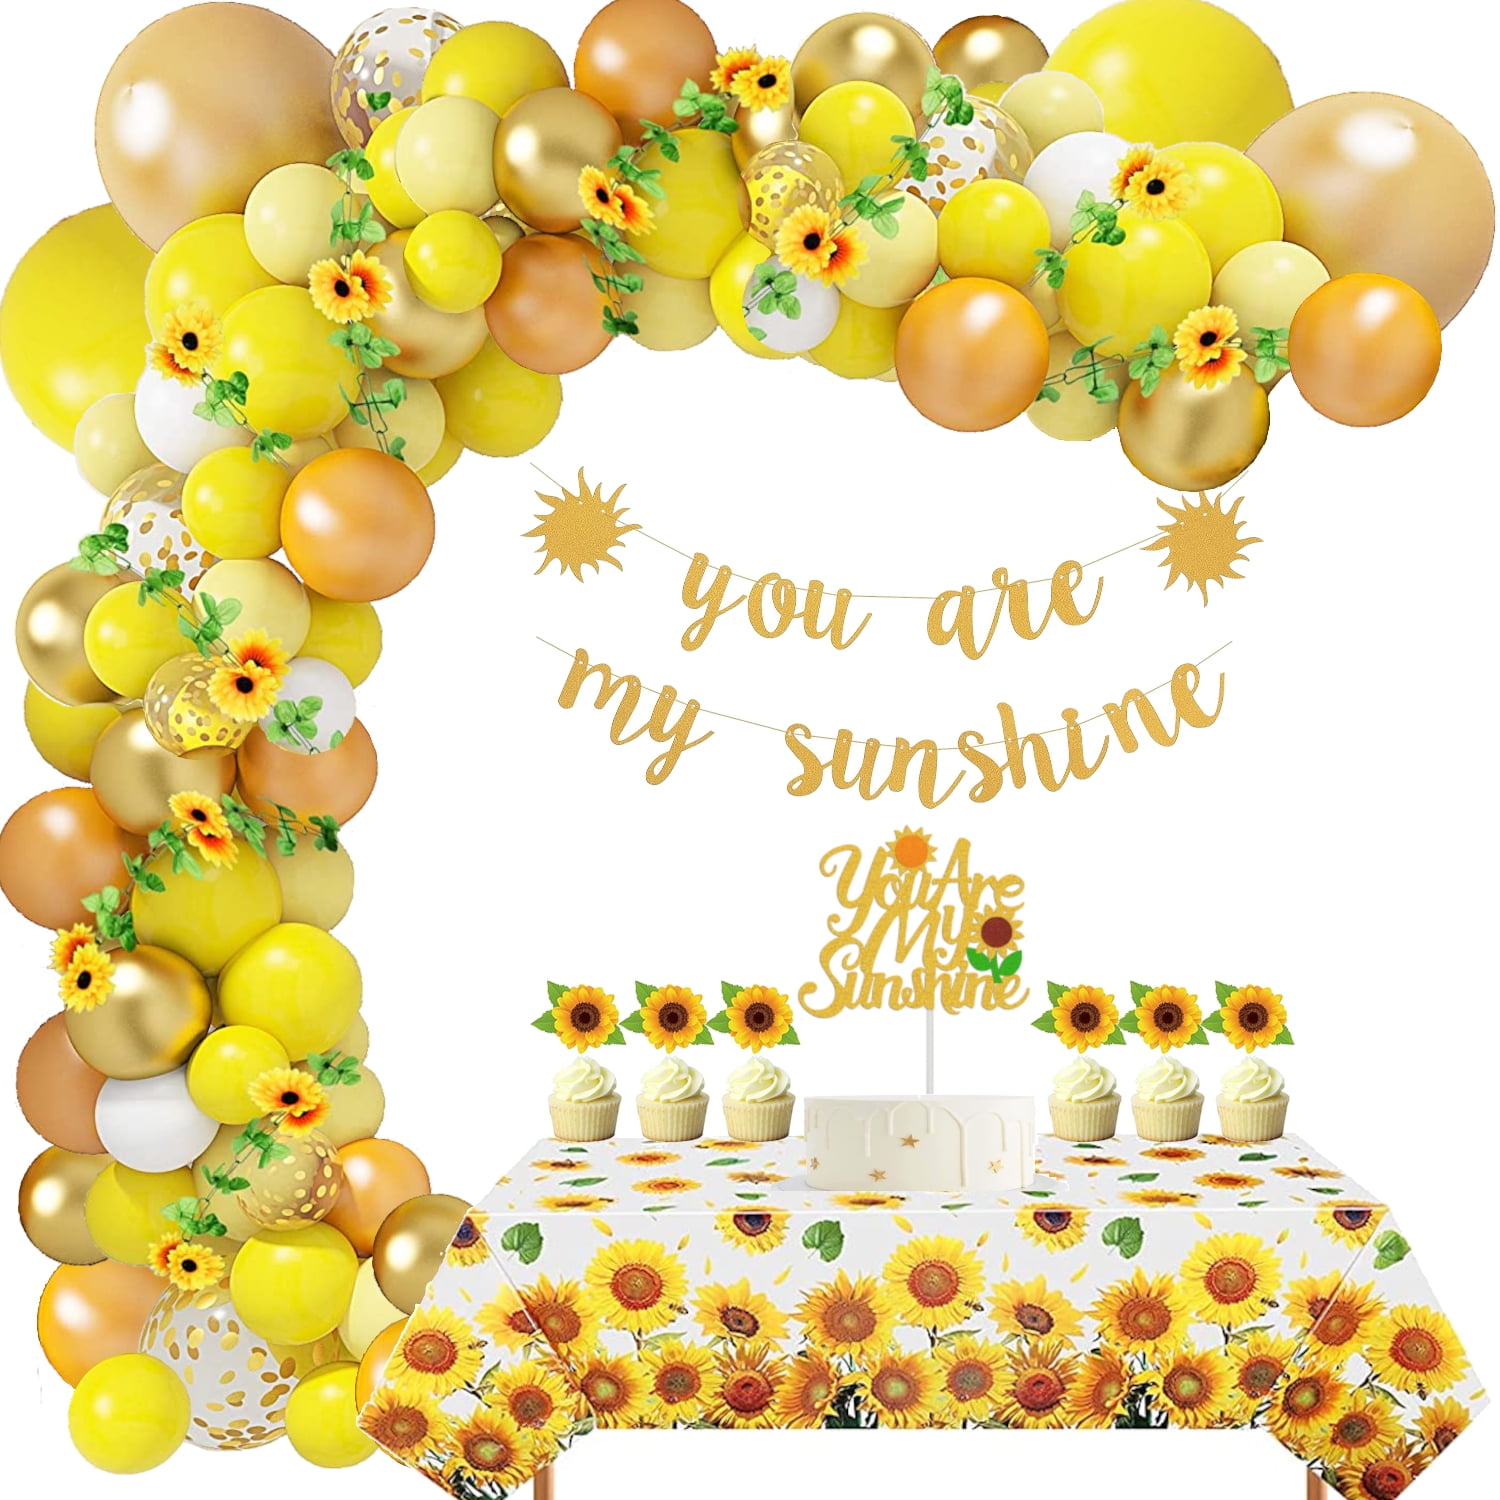 Sunflower Theme Party Decorations Balloons Garland Gold Glitter You Are My Sunshine Banner Sunflower Pom Poms Bee Theme Party Girl or Boy